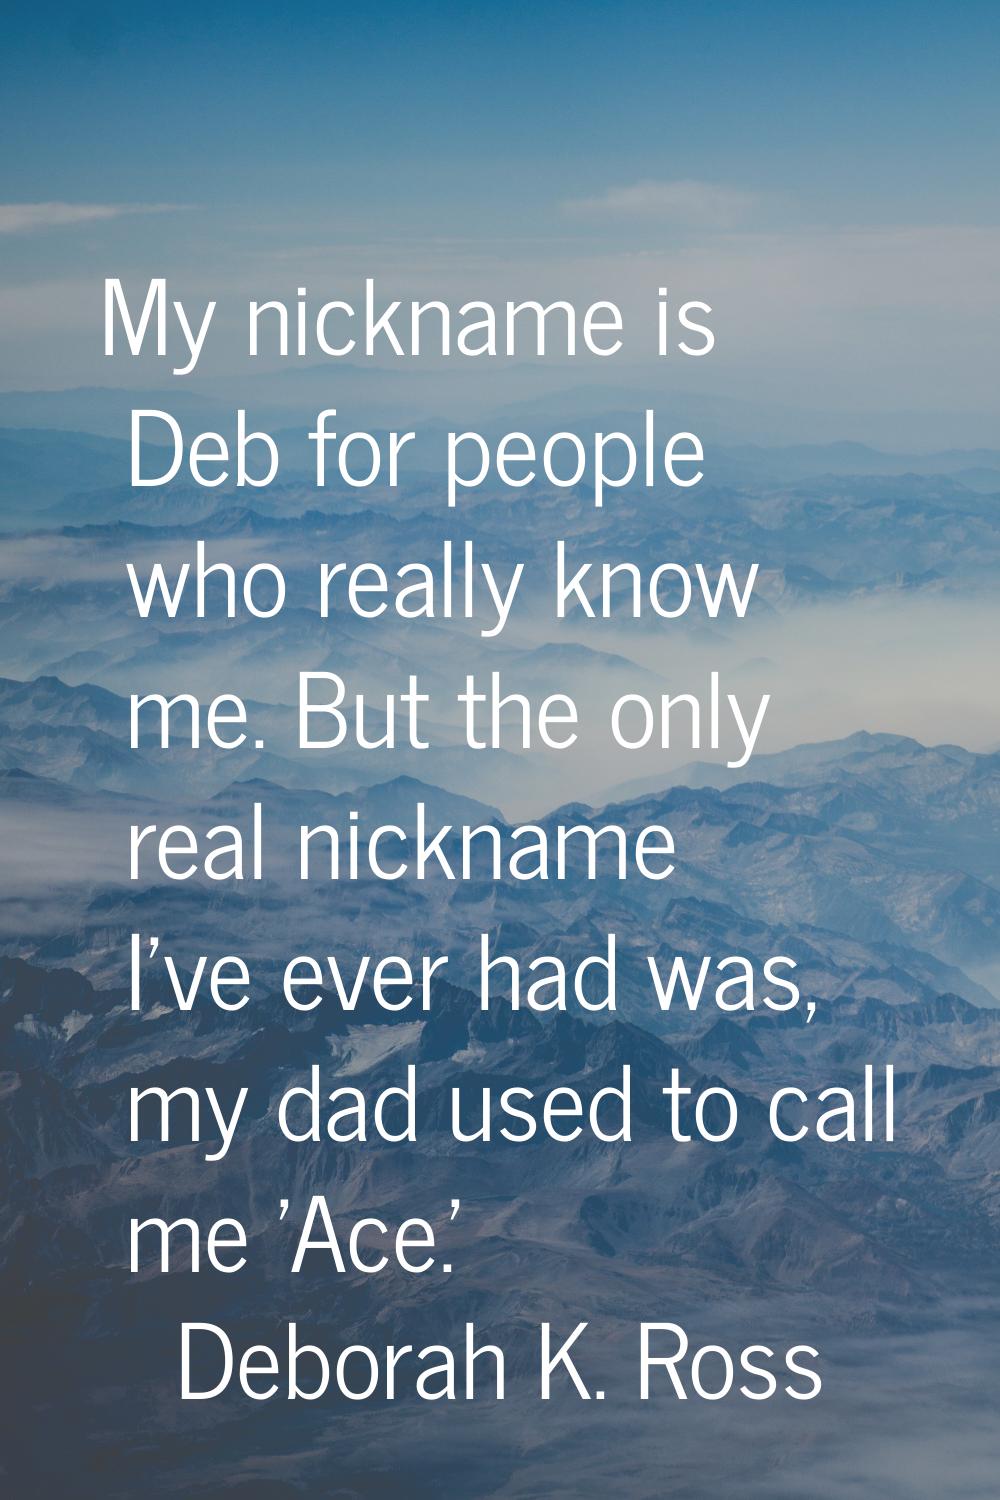 My nickname is Deb for people who really know me. But the only real nickname I've ever had was, my 